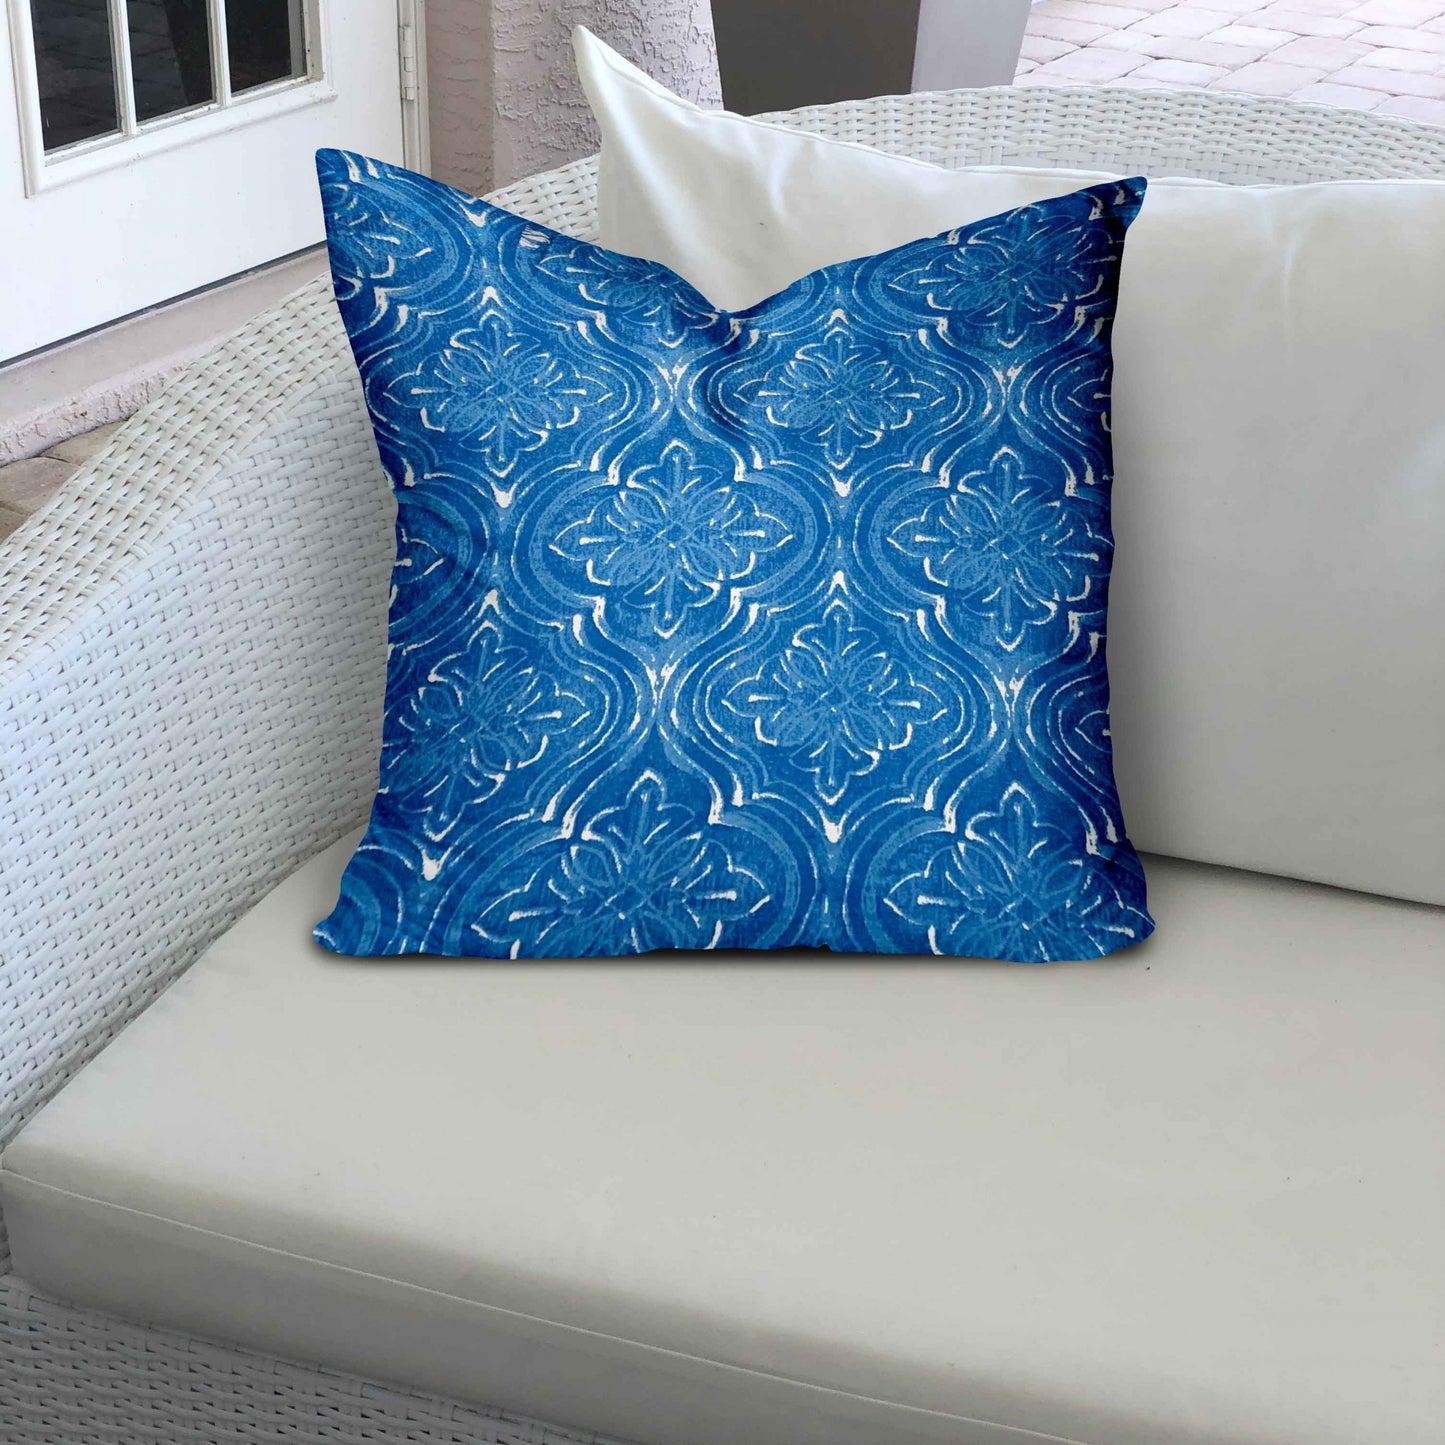 24" X 24" Blue And White Zippered Ikat Throw Indoor Outdoor Pillow